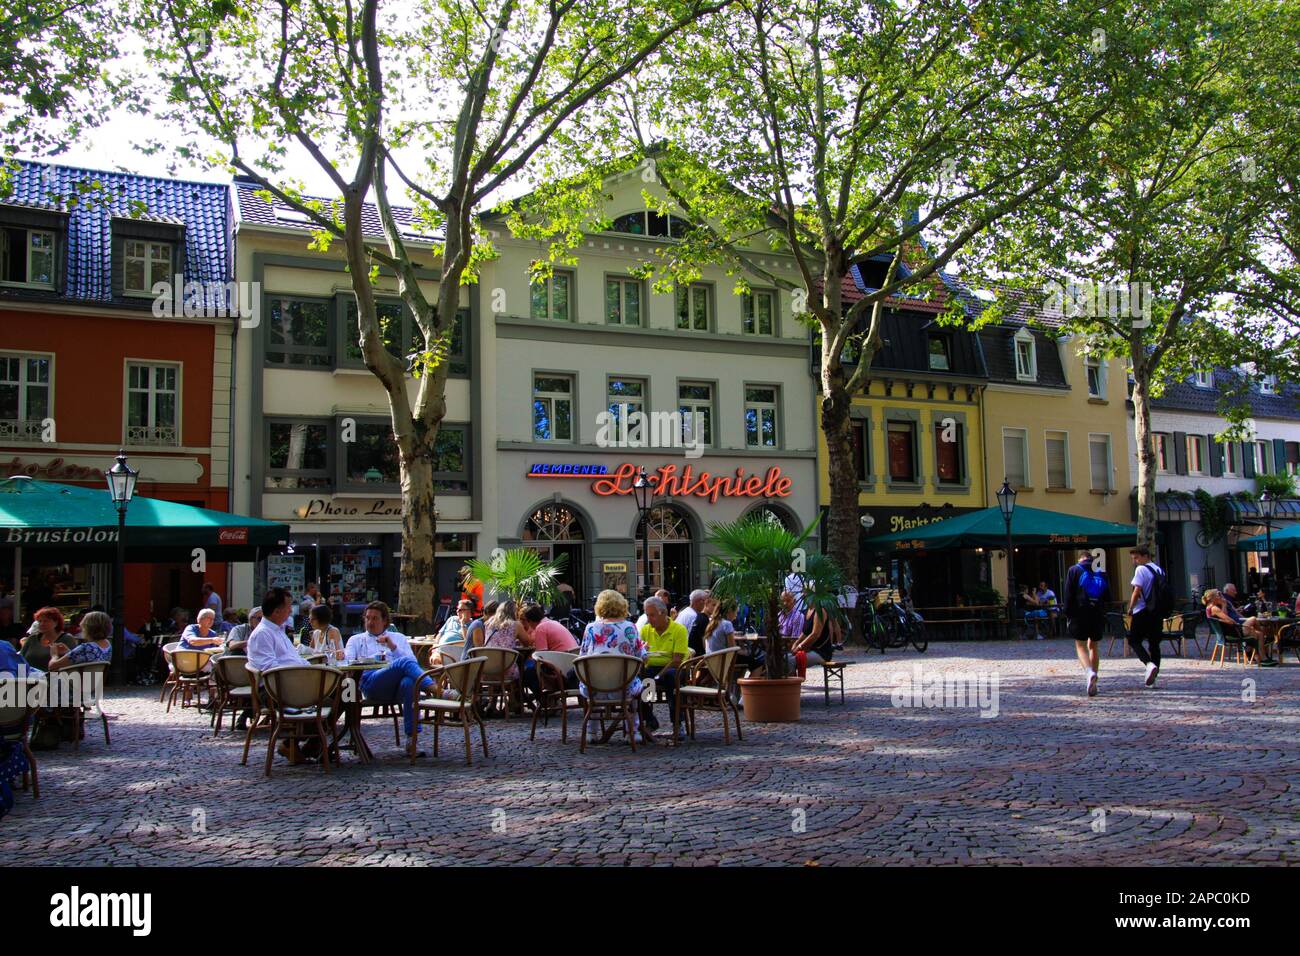 VIERSEN (KEMPEN), GERMANY - AUGUST 23. 2019: People sitting outdoor on market place under trees in summer Stock Photo